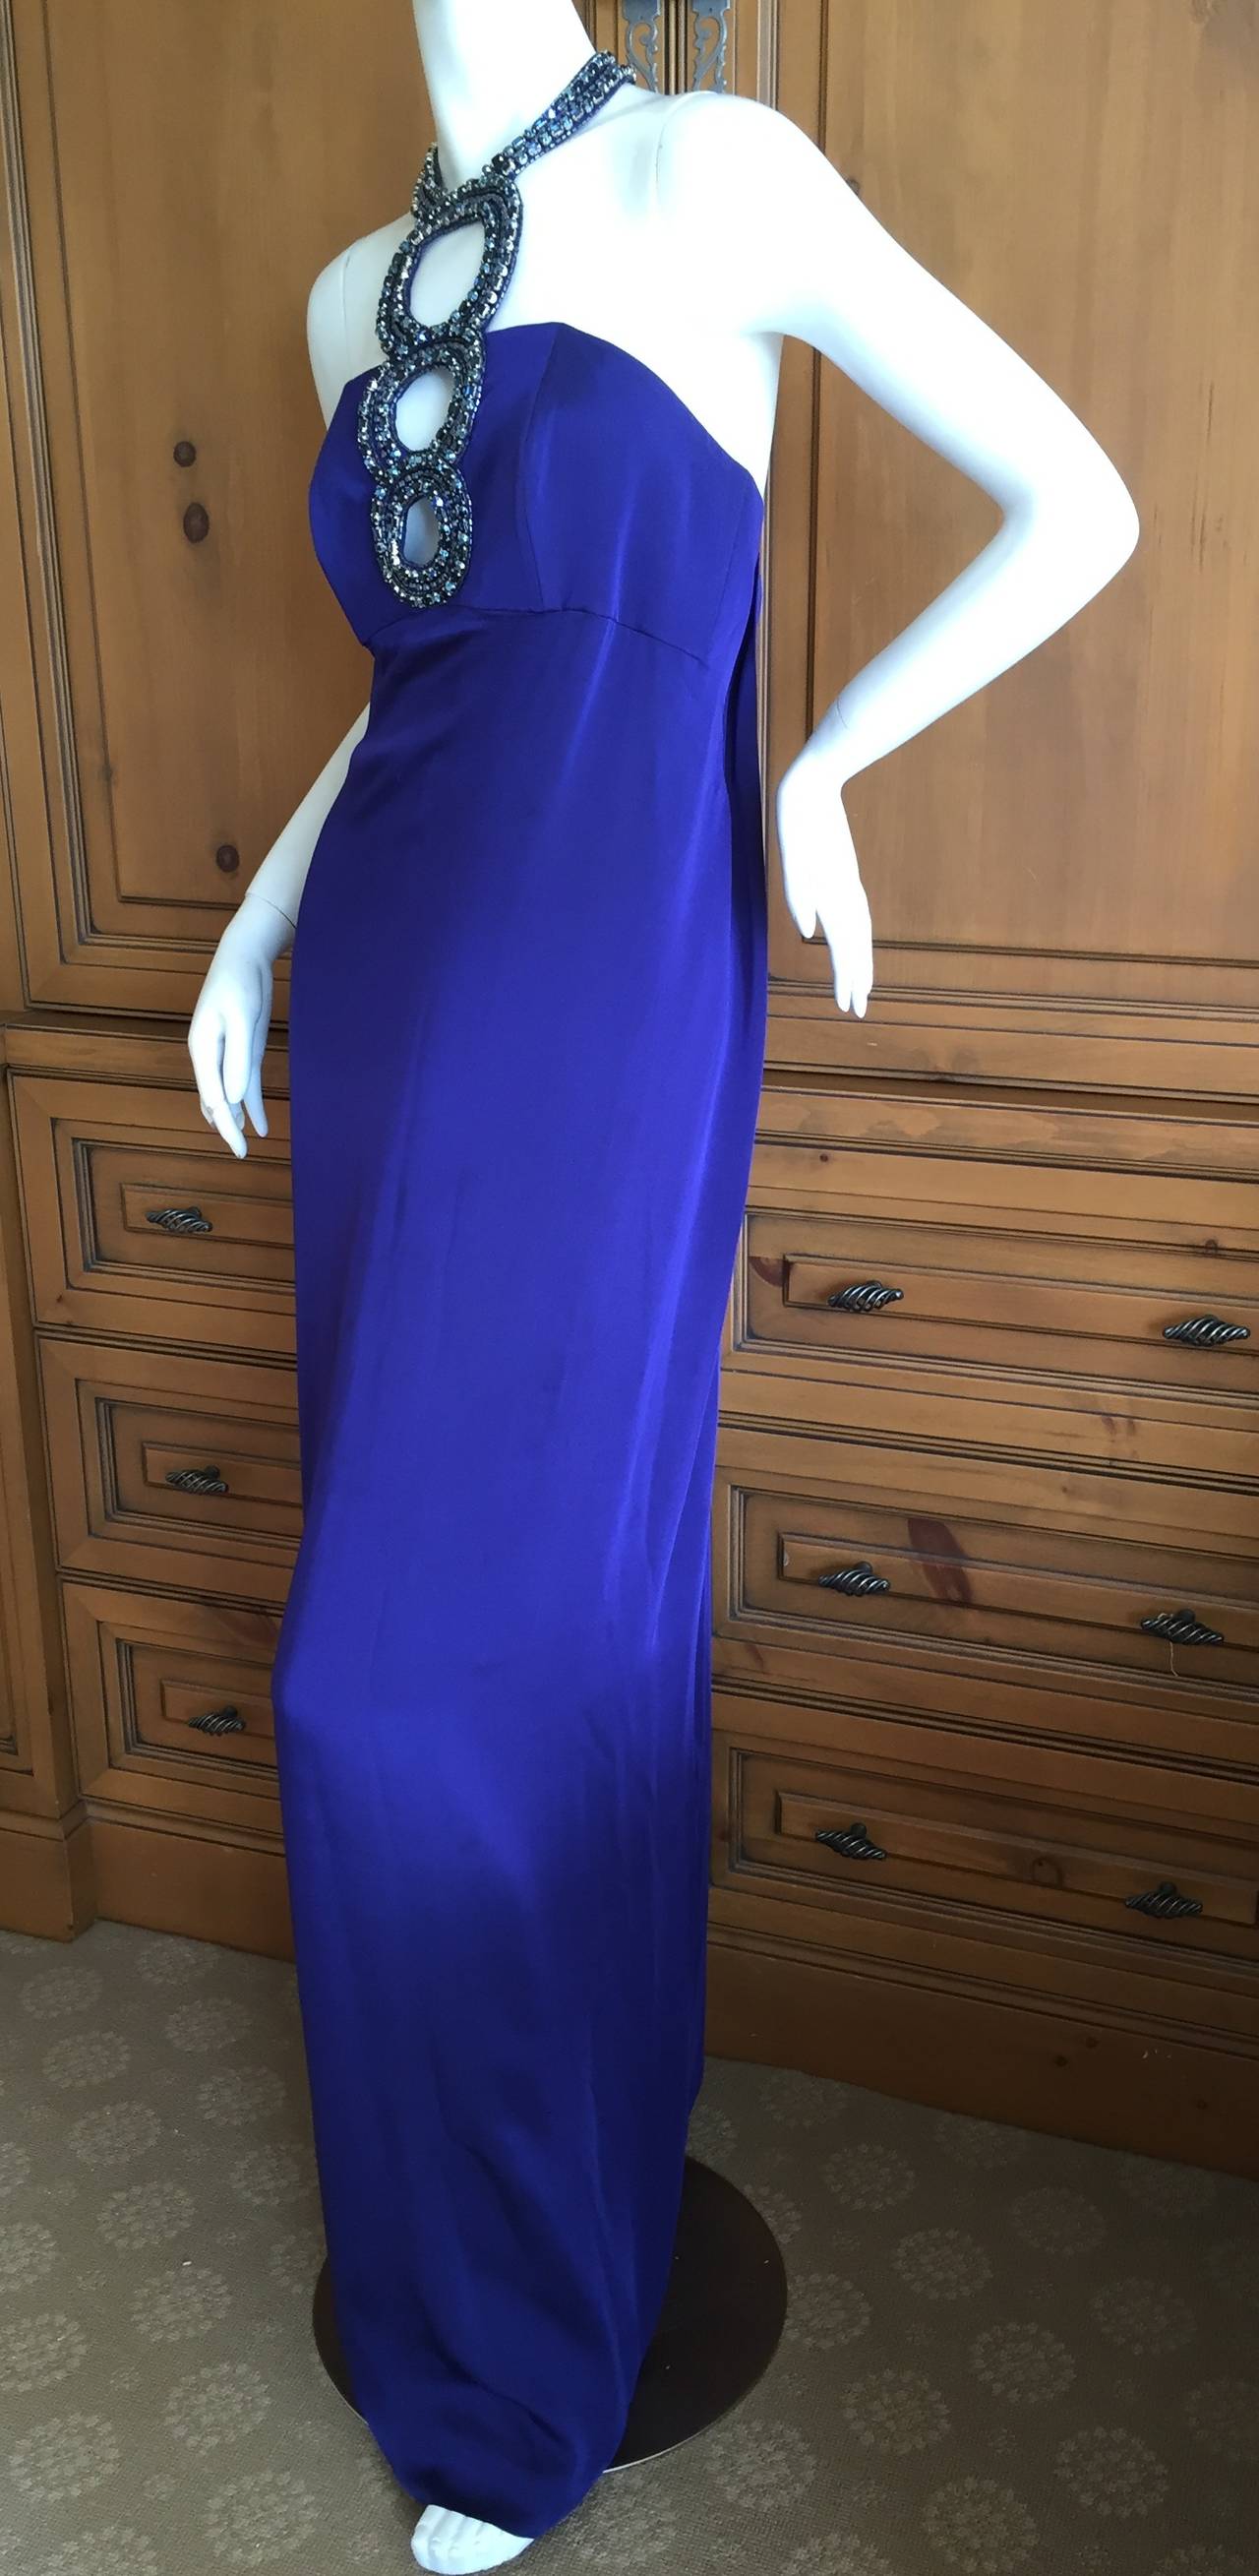 Beautiful blue silk dress with dramatic jeweled keyhole at bust and neck.
This has never been hemmed and is very long 65